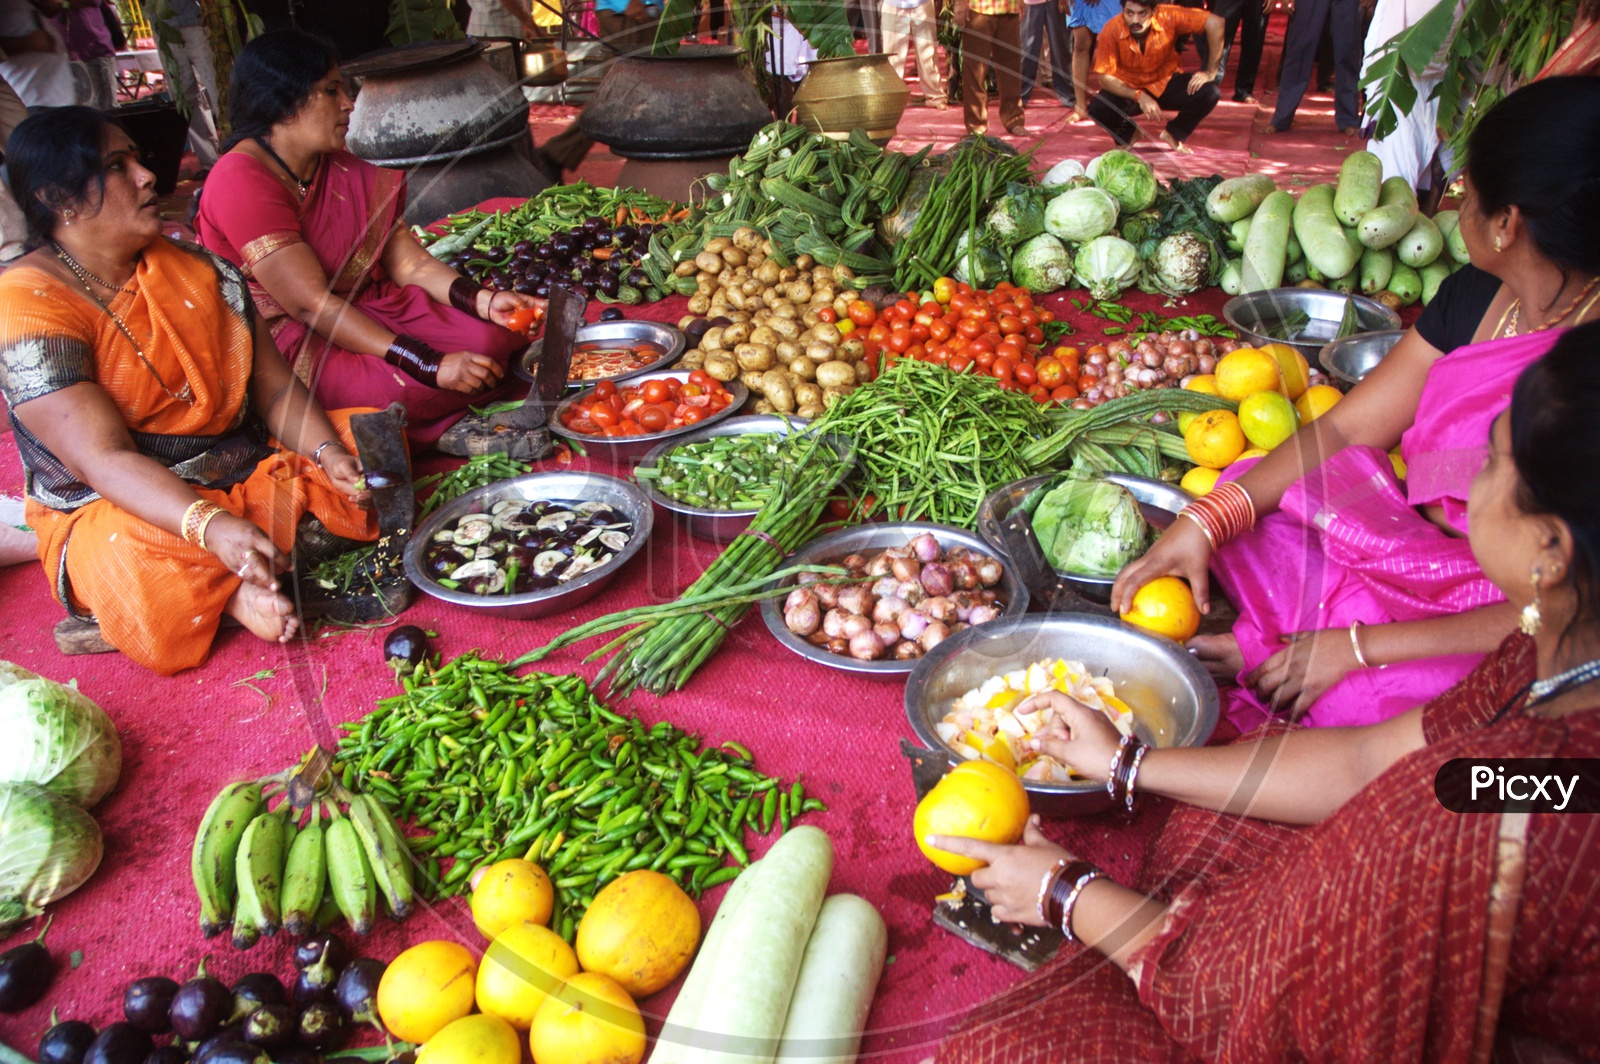 Group of women with various vegetables